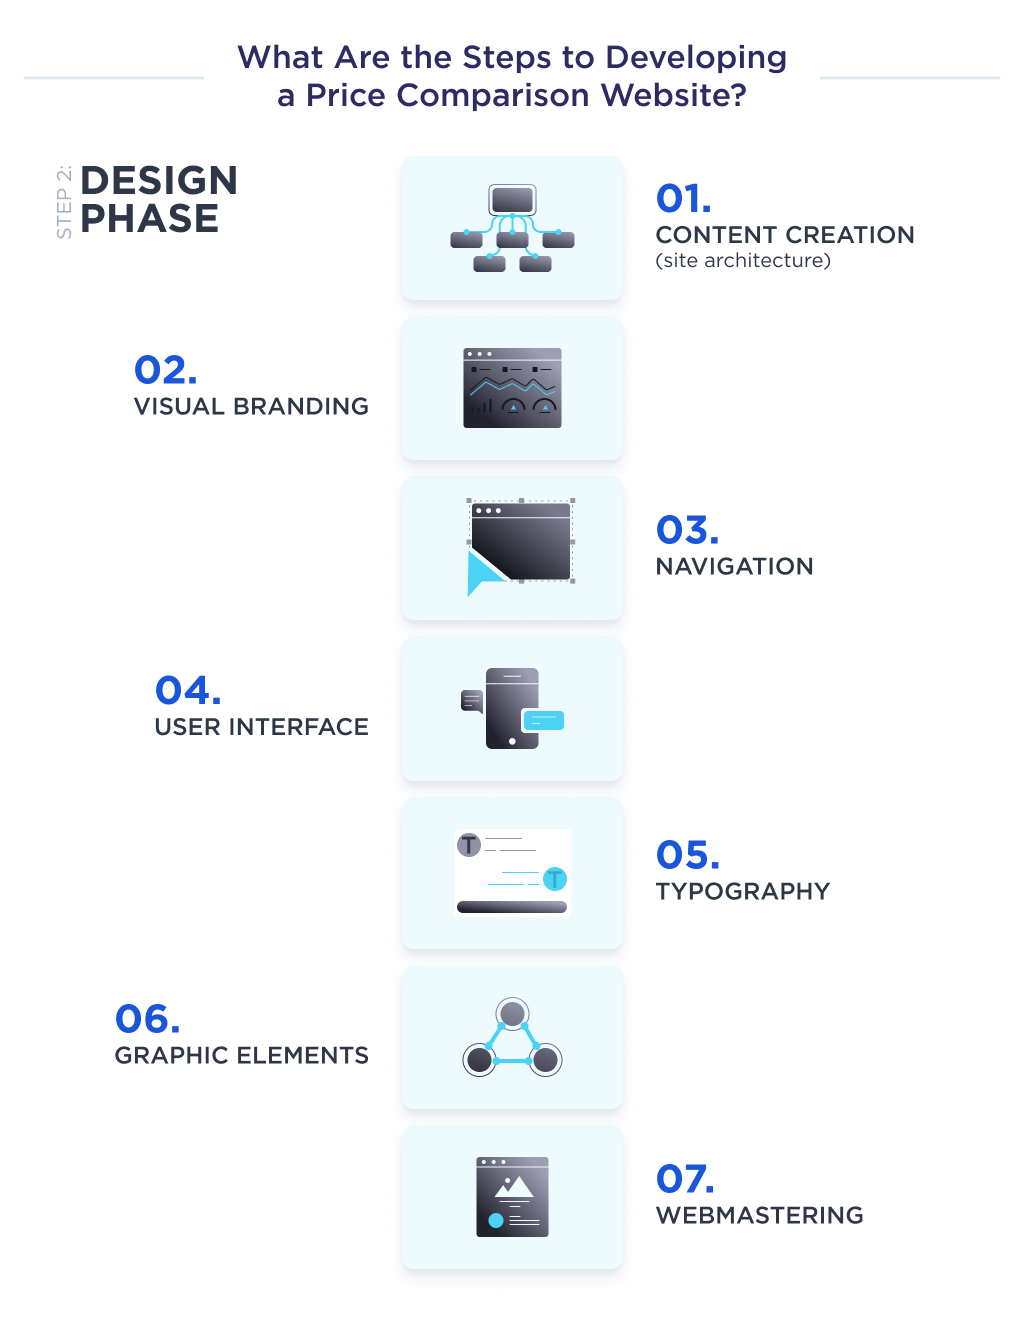 This picture shows the seven basic elements that determine the design phase of the web site development process for price comparison 